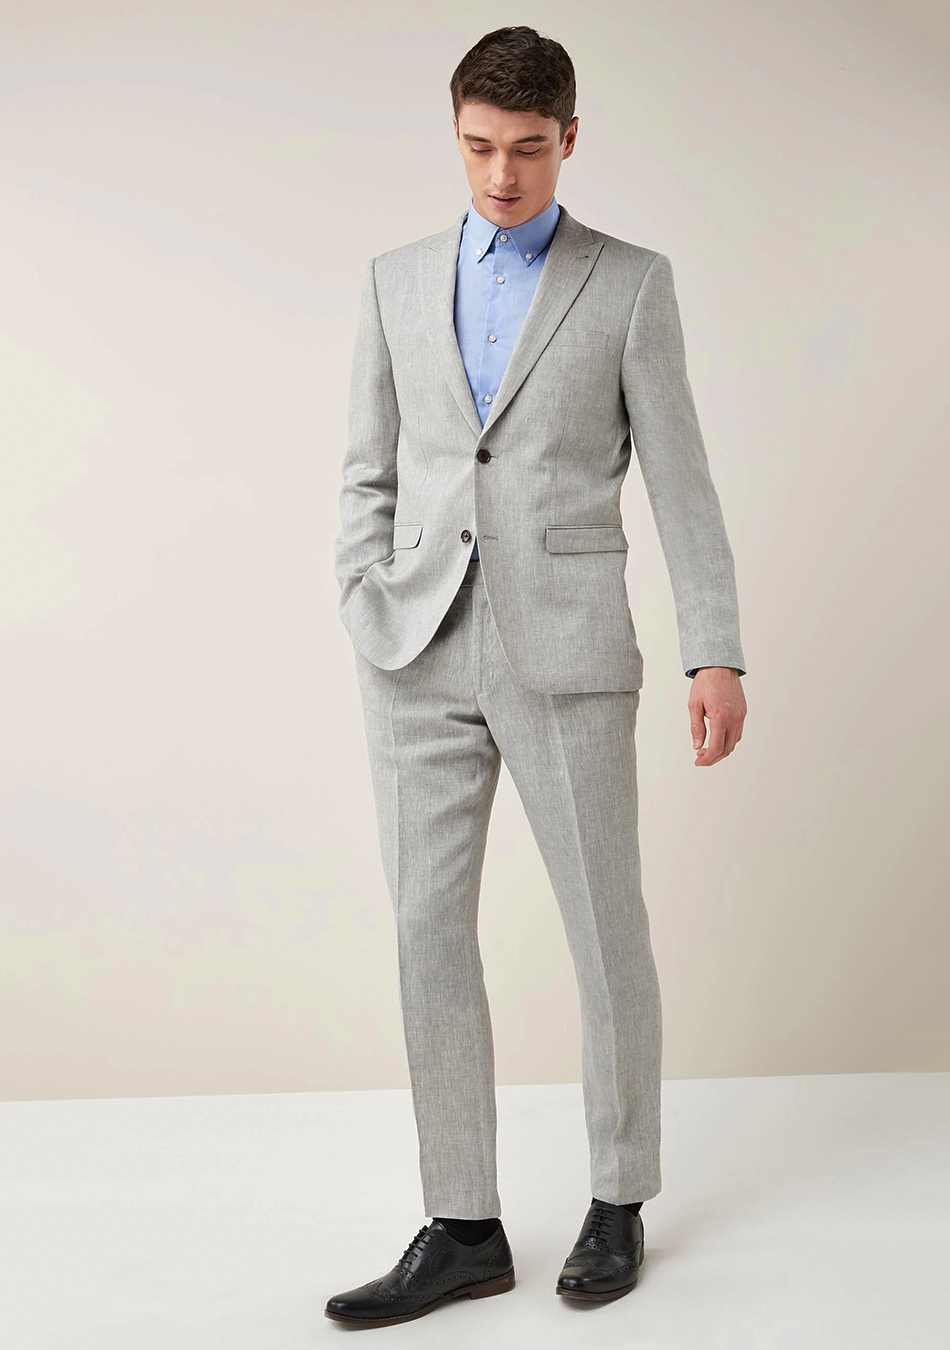 Grey suit, blue shirt, and black Oxford shoes